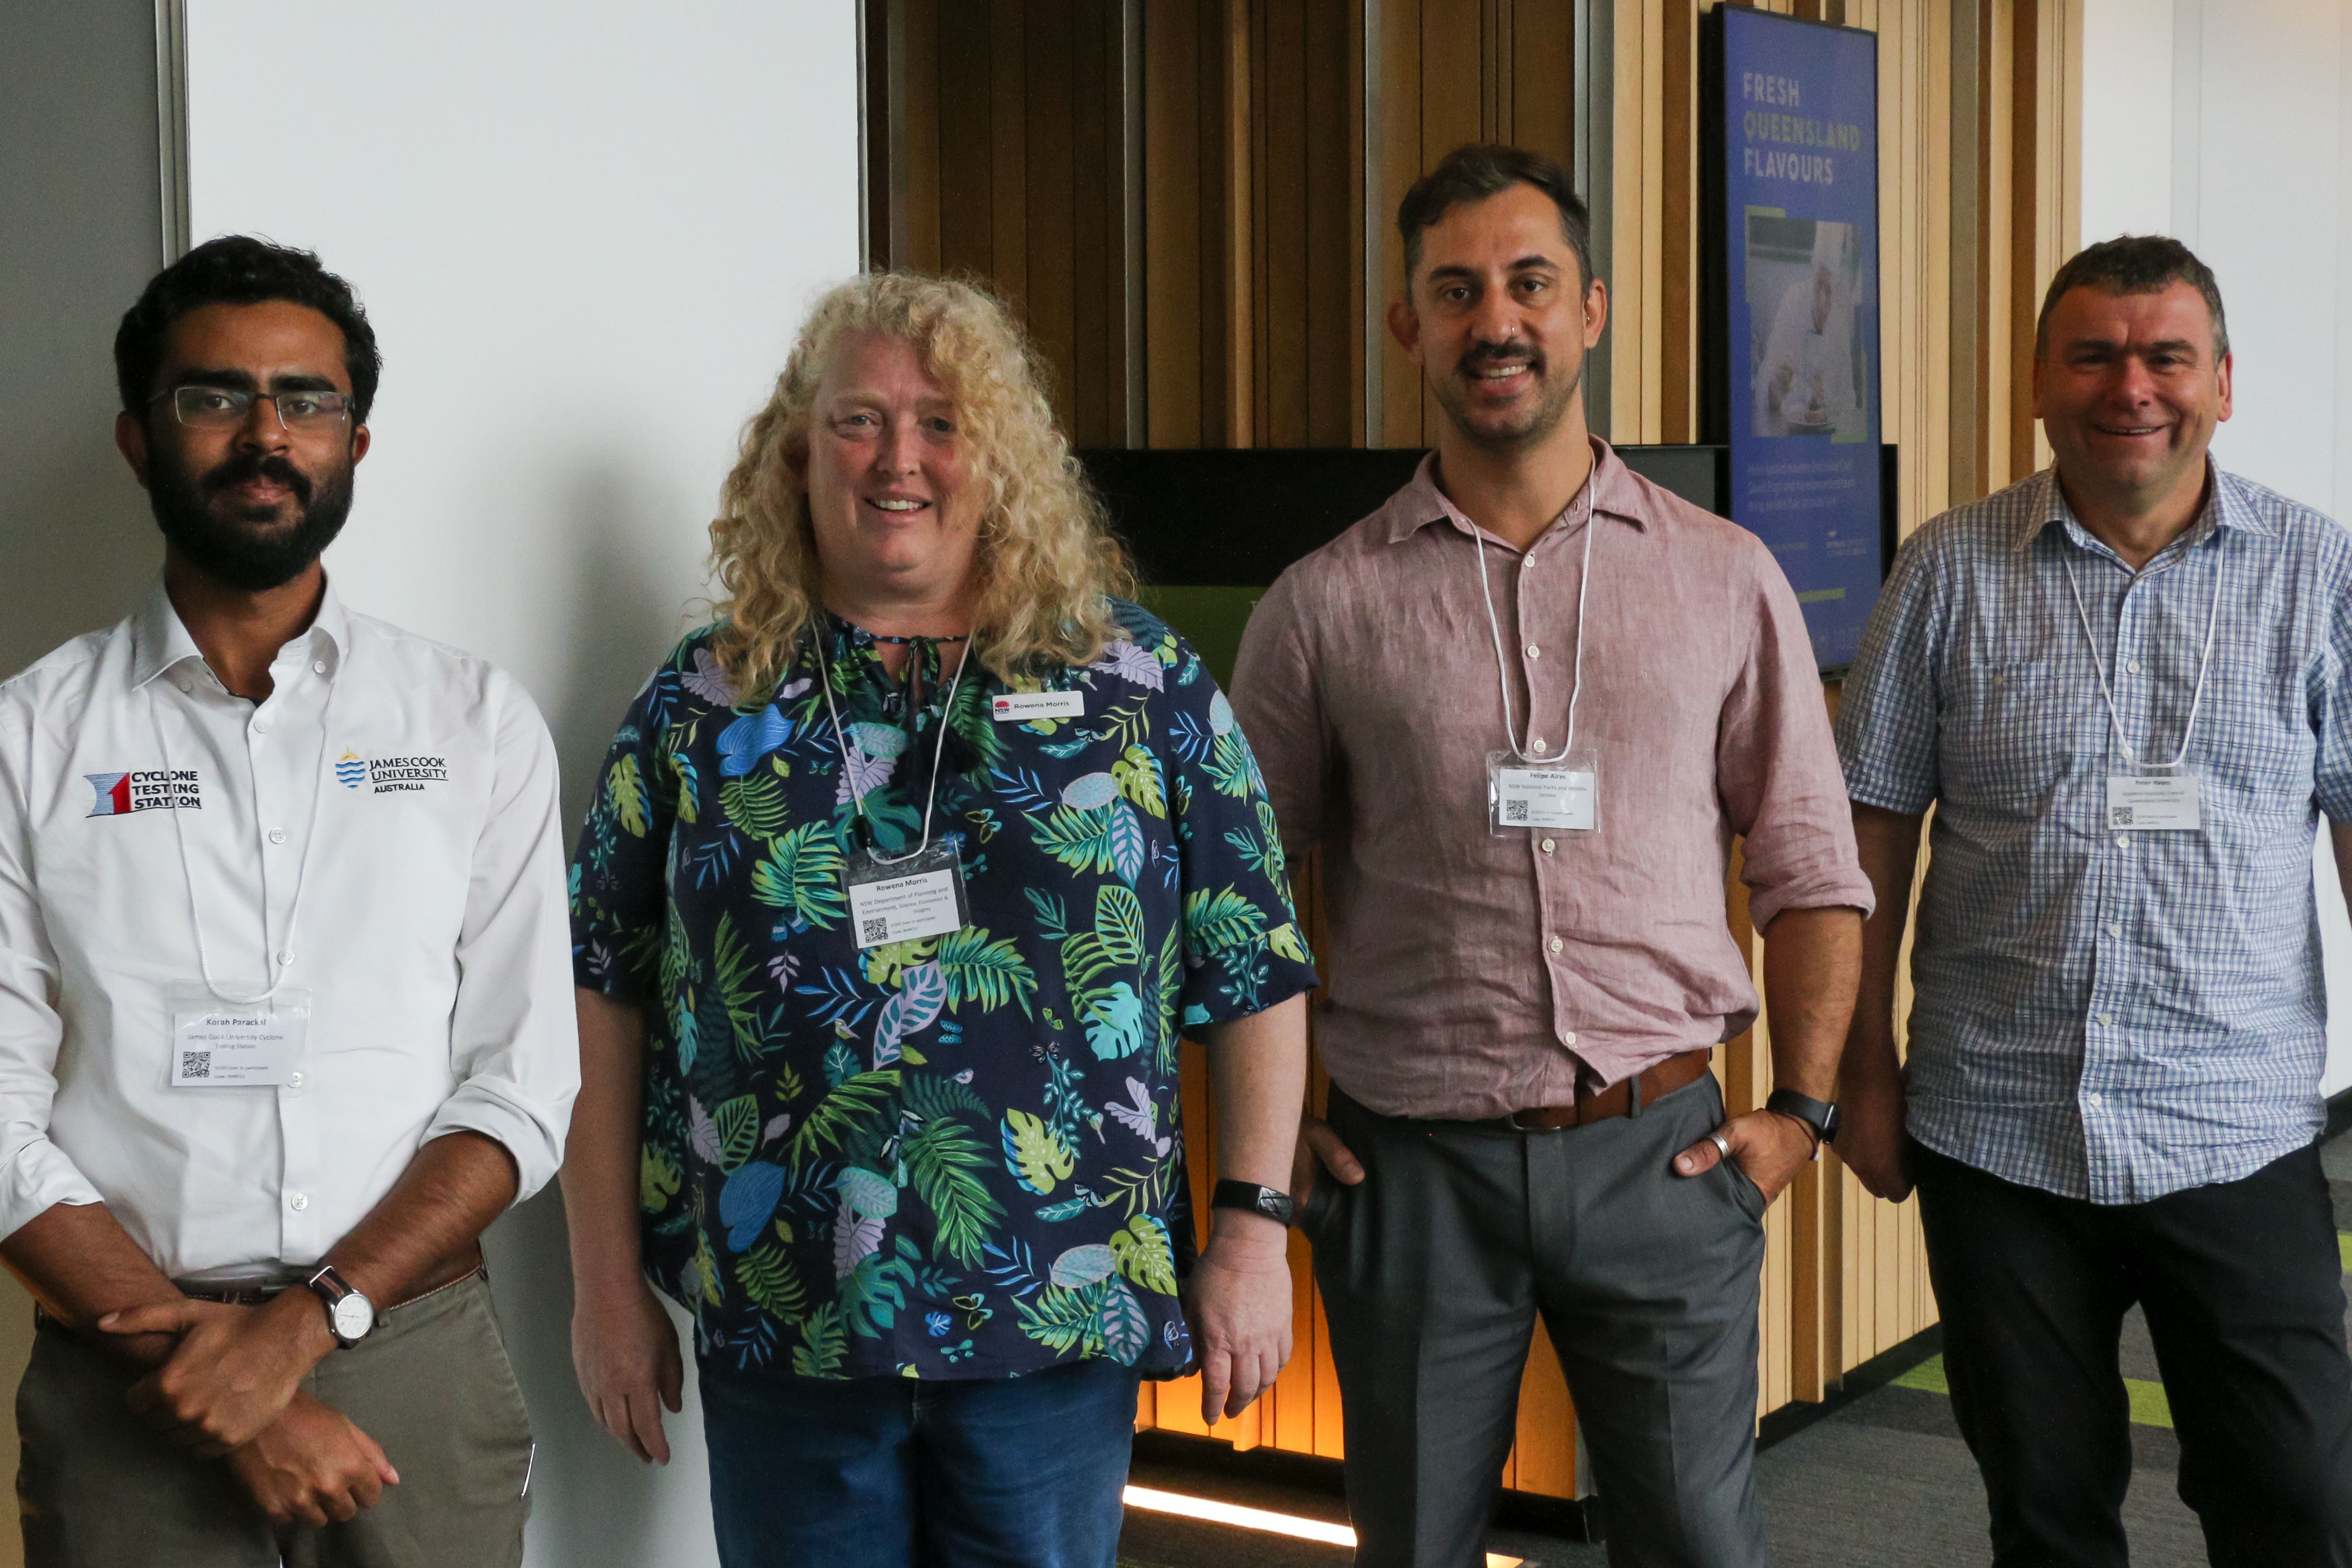 Members of the CRC’s postgraduate program meeting at the Natural Hazards Research Forum in Brisbane, October 2022: (from left to right) Dr Korah Parackal, Dr Rowena Morris, Dr Felipe Aires and Dr Peter Hayes.